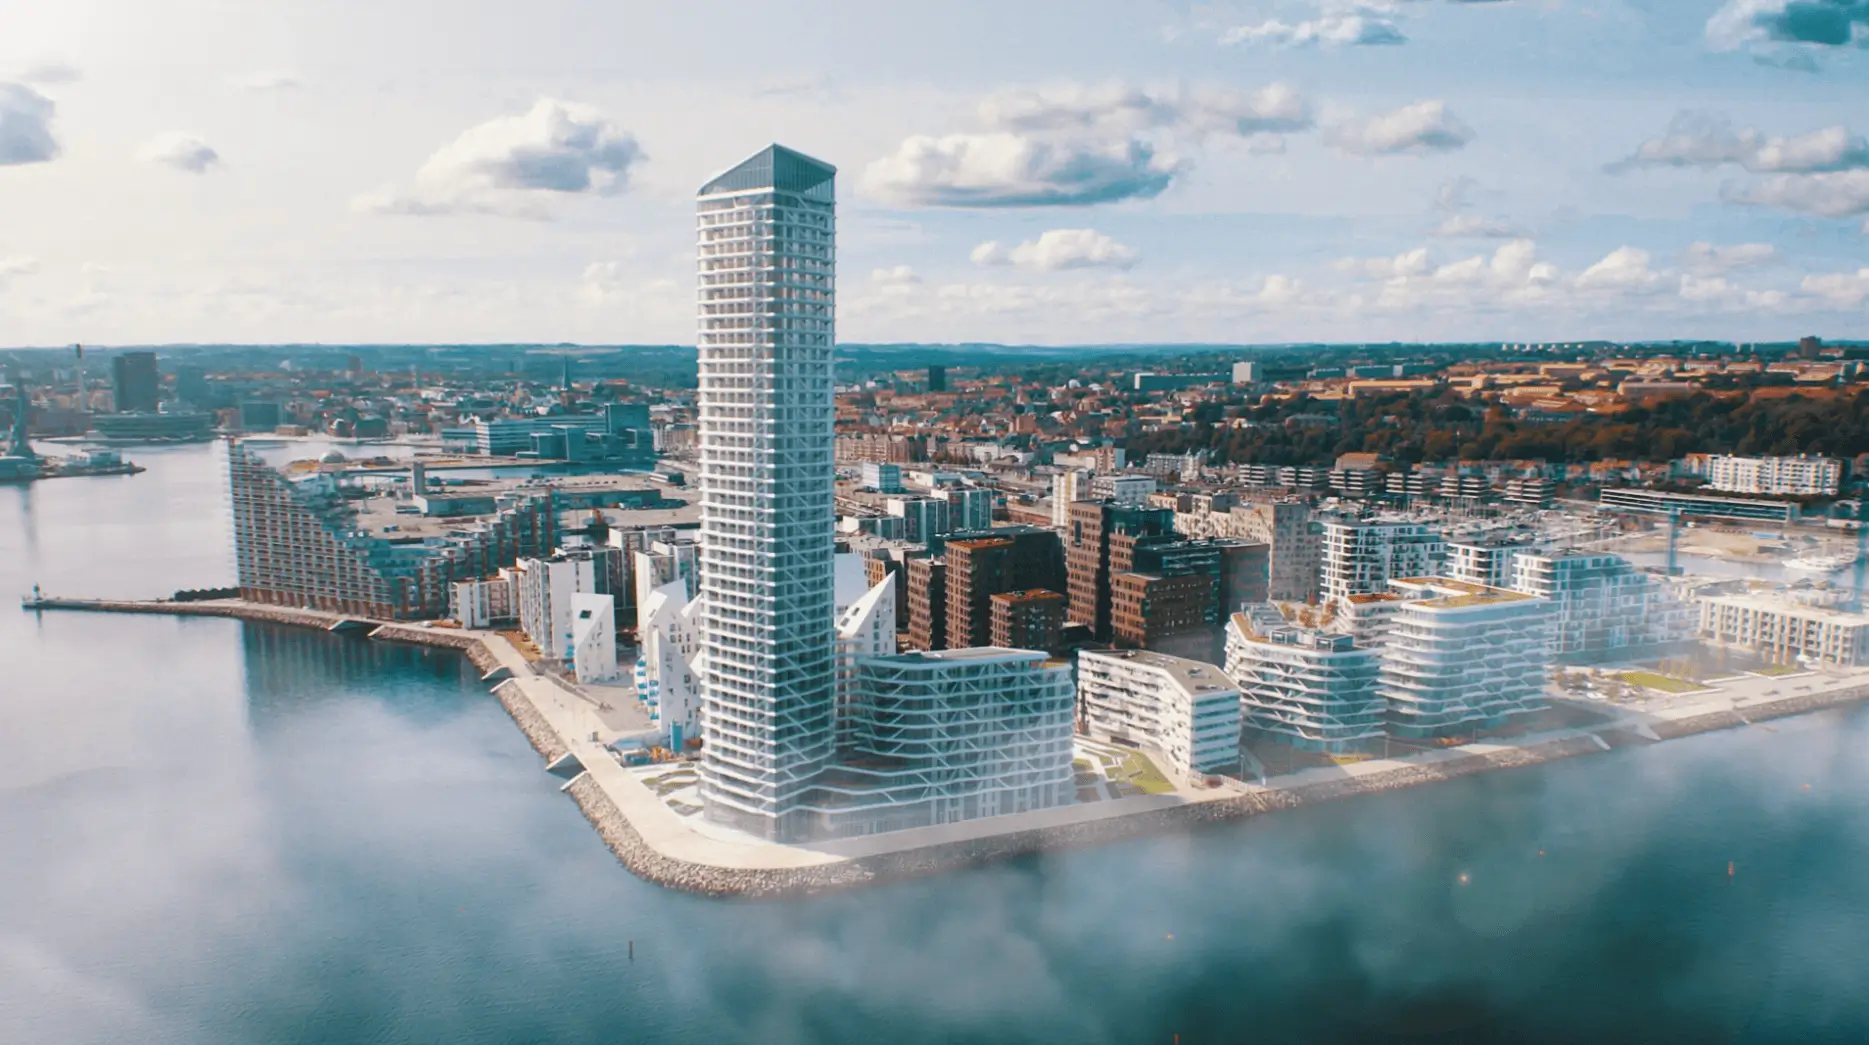 Lighthouse - Denmark's tallest construction building. The construction team from Denmark used Imerso to follow lean construction principles.